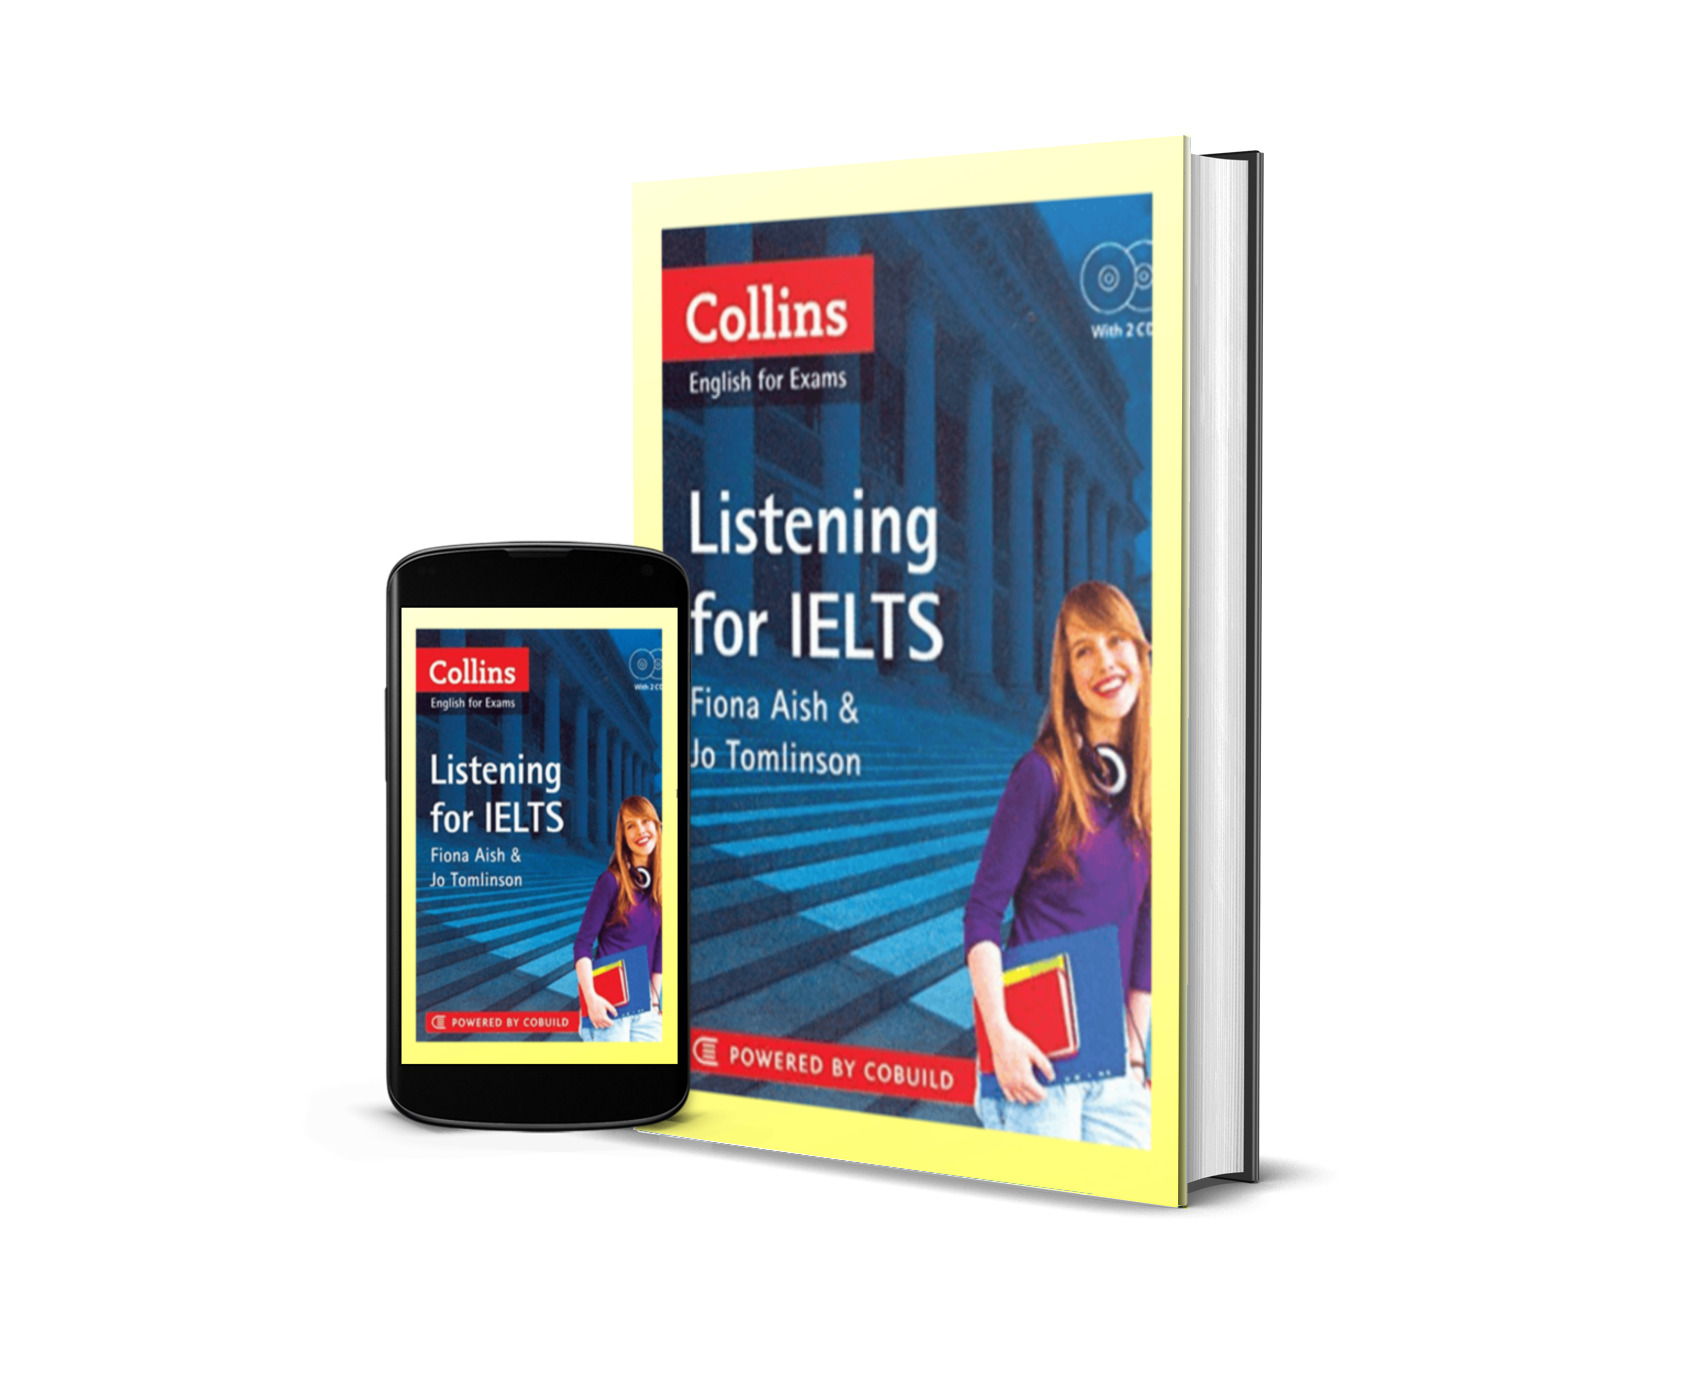 Collins Listening for the IELTS | Download ebook + Audio